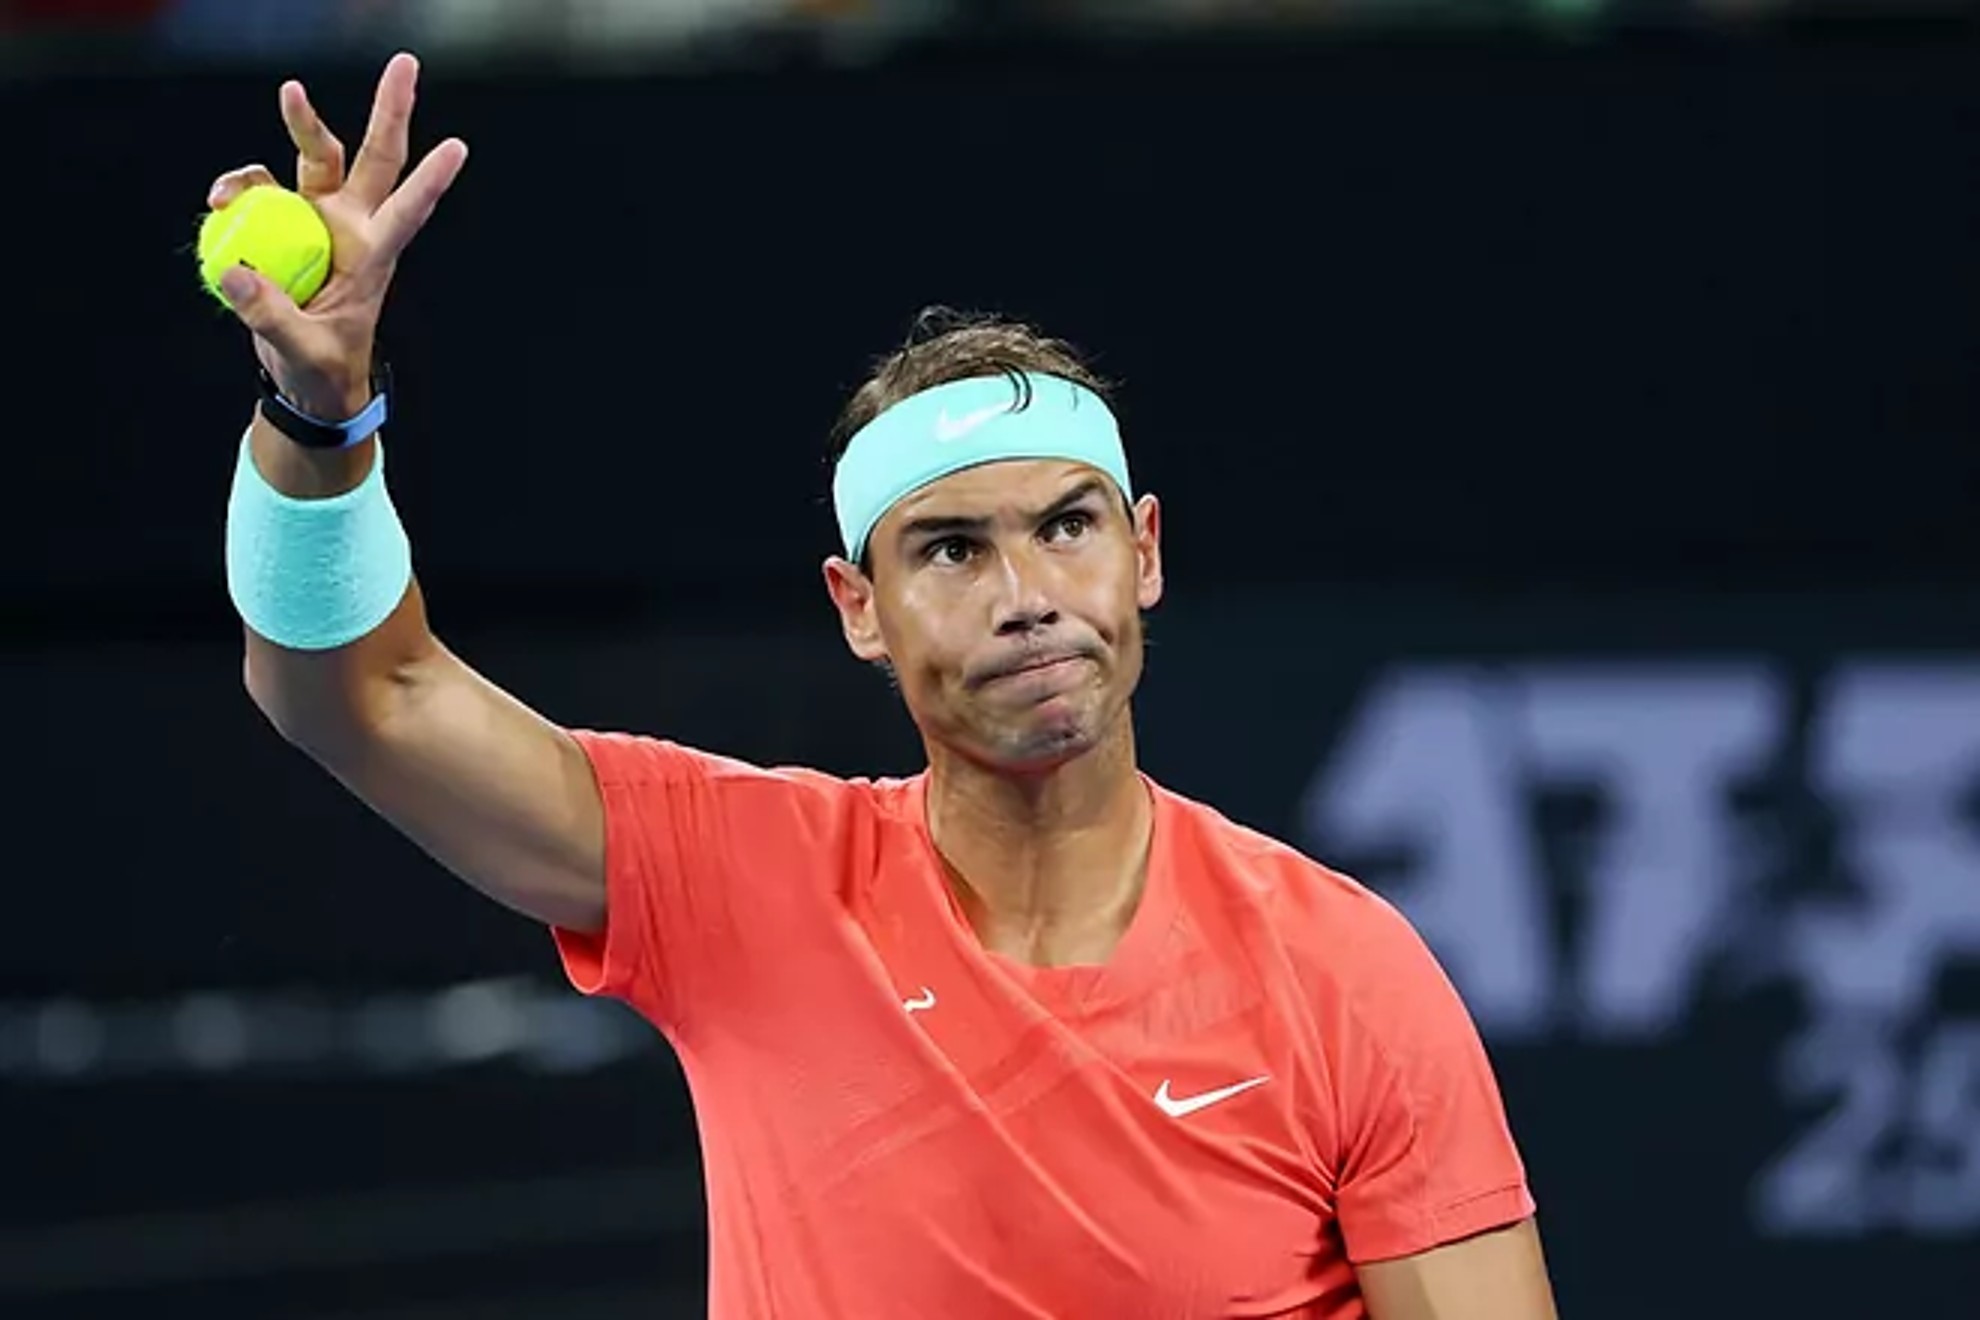 Rafa Nadal is back to his usual self: victory over Thiem 349 days later and he gets emotional